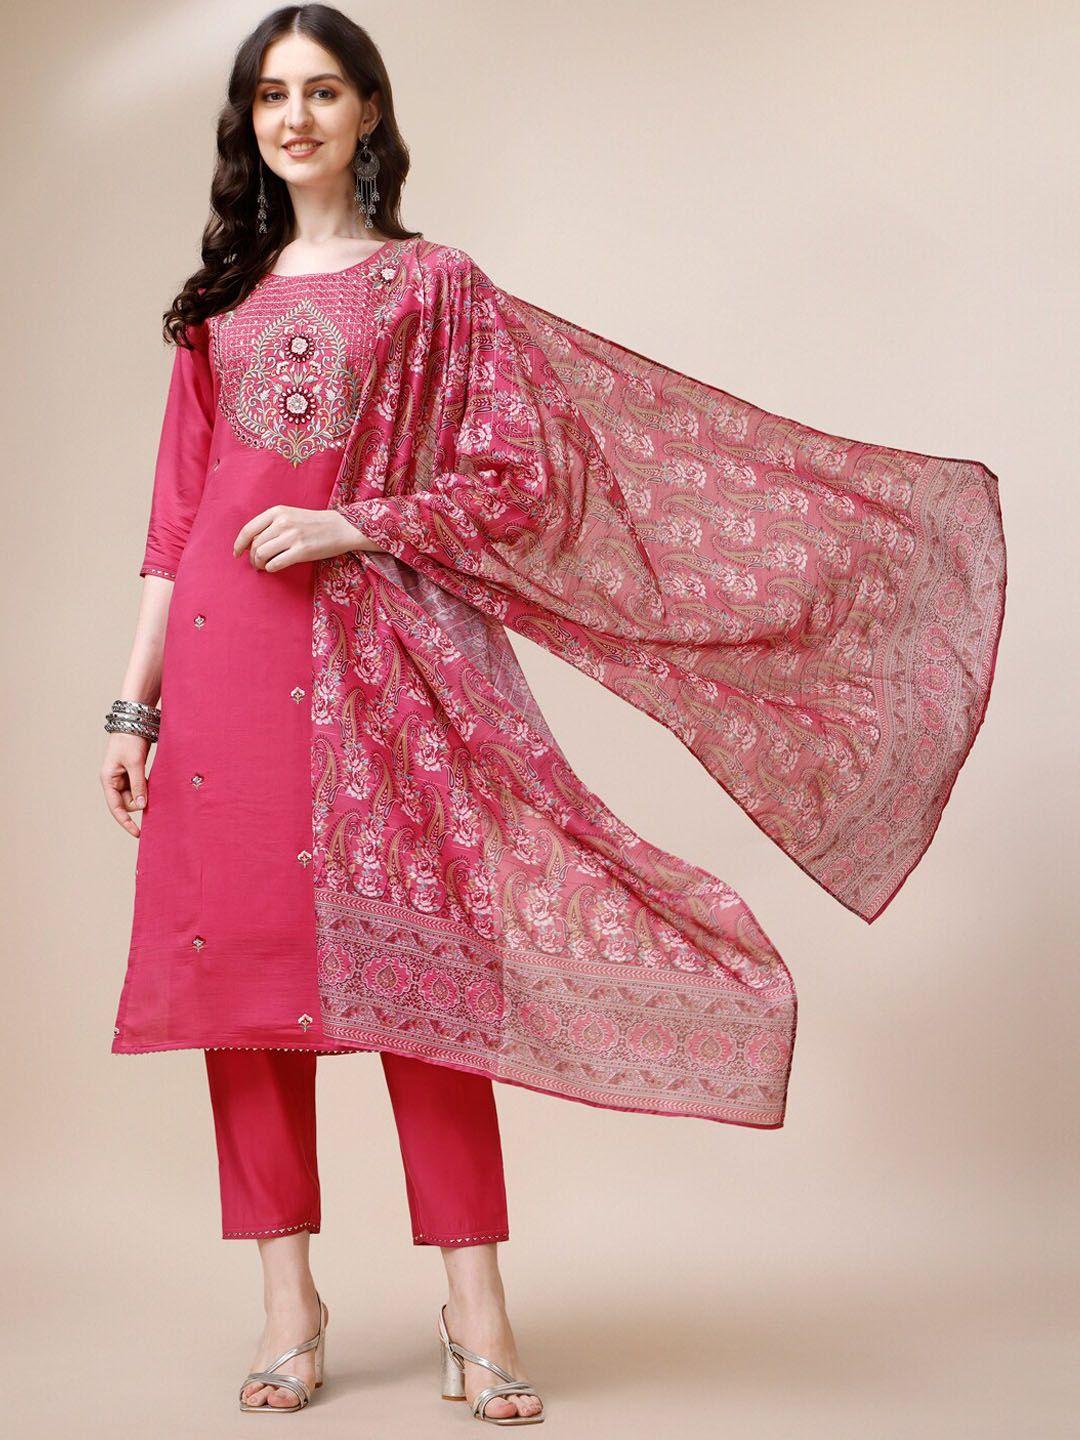 Berrylicious Ethnic Motifs Embroidered Sequined Straight Kurta & Trousers With Dupatta